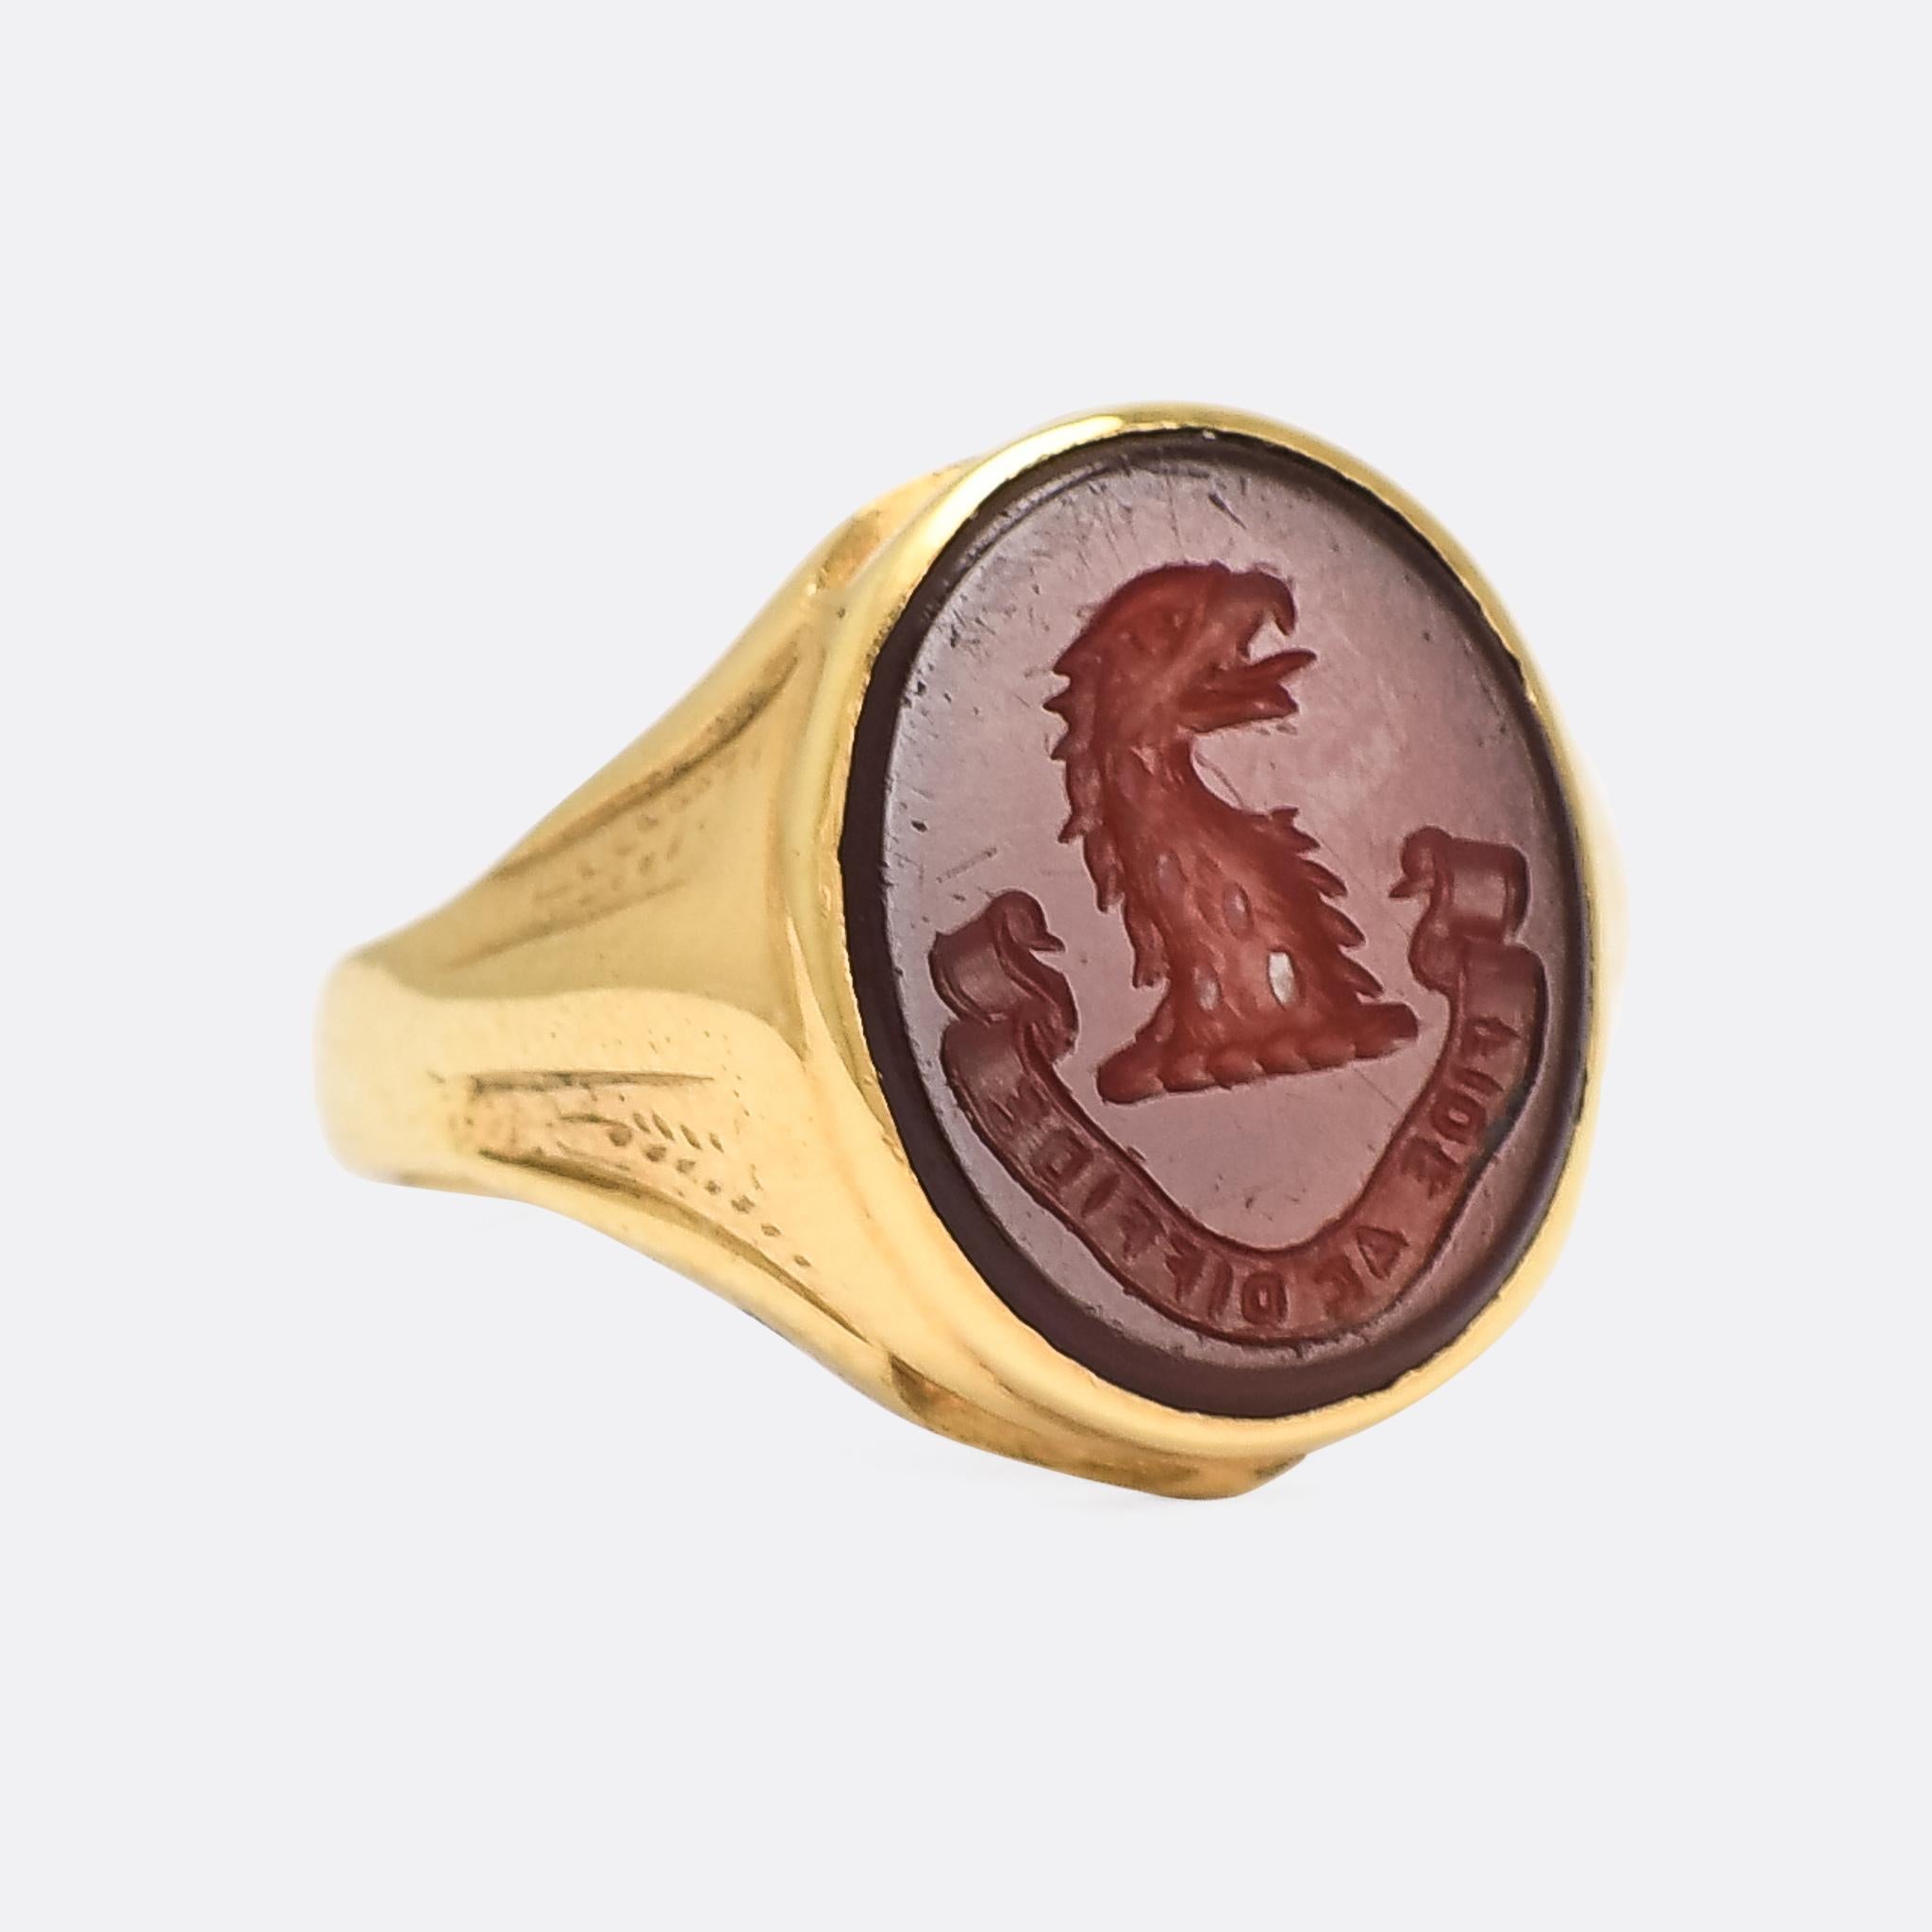 A superb Victorian carnelian signet ring with heraldic intaglio crest and motto. The crest depicts an eagle's head, above a banner with the Latin FIDE AC DIFFIDE, or 